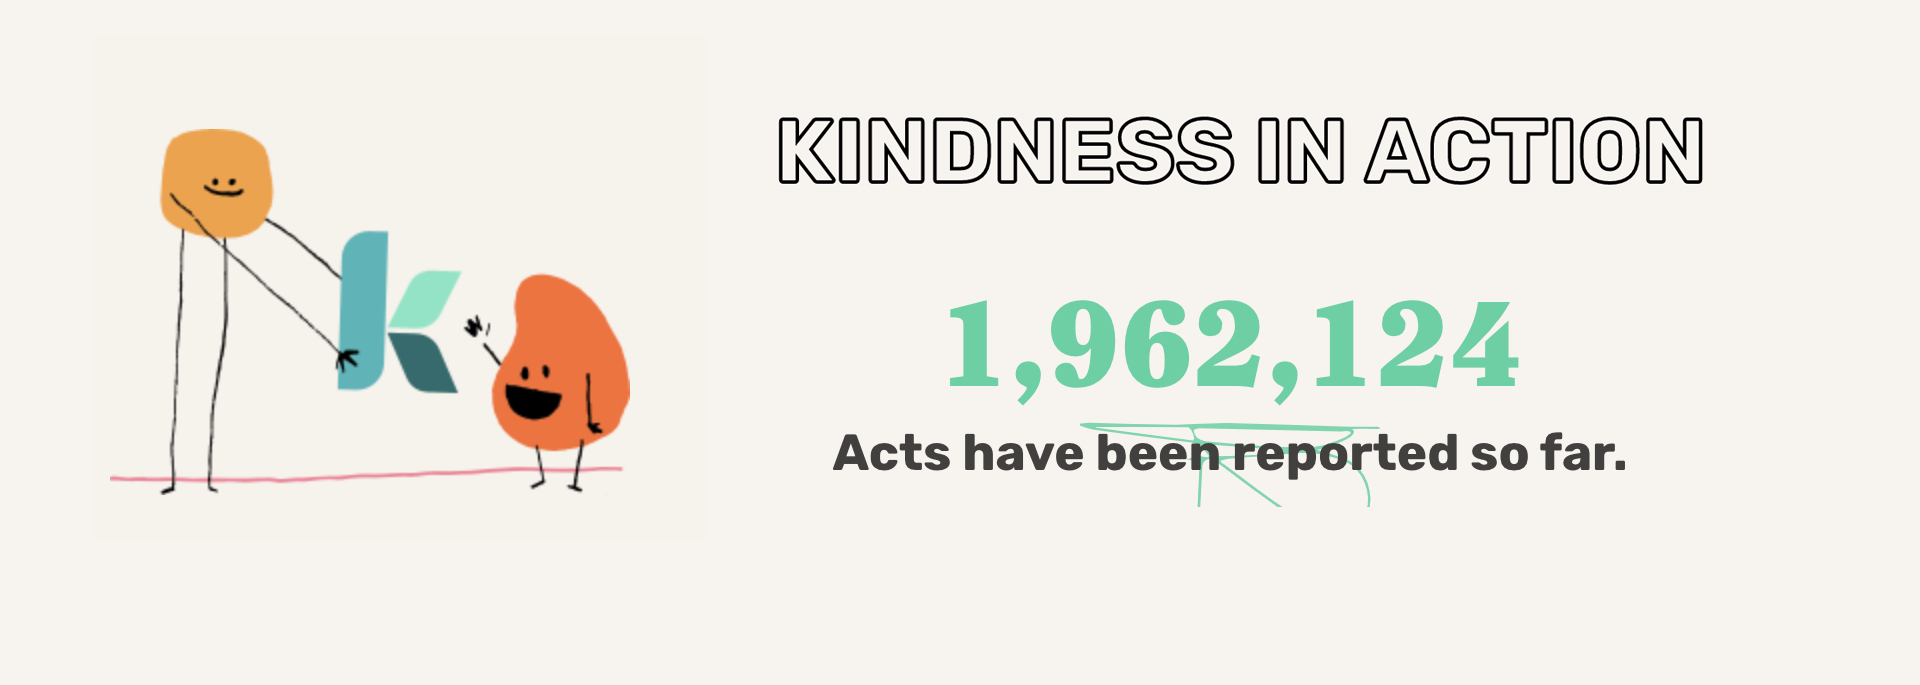 Kind acts